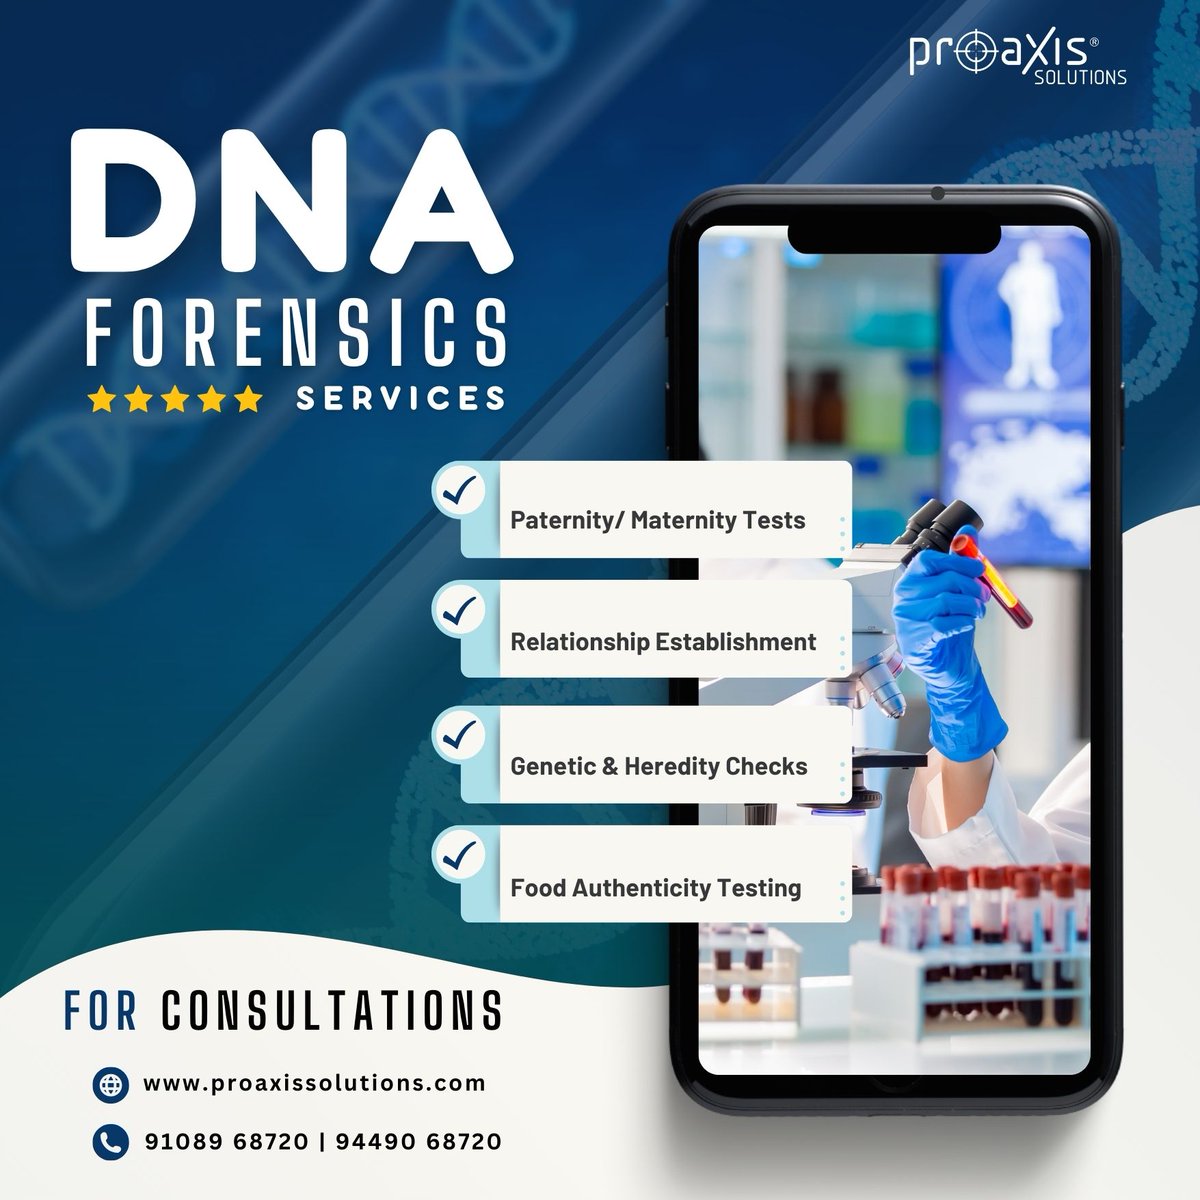 Are you looking for DNA Forensics Services? 

For more info, visit us:
proaxissolutions.com

#dnaforensics #discovertruth #forensicscience #forensics #cyberforensics #digitalforensics #computerforensics #multimediaforensics #forensicanalysis #forensicservices #proaxissolutions